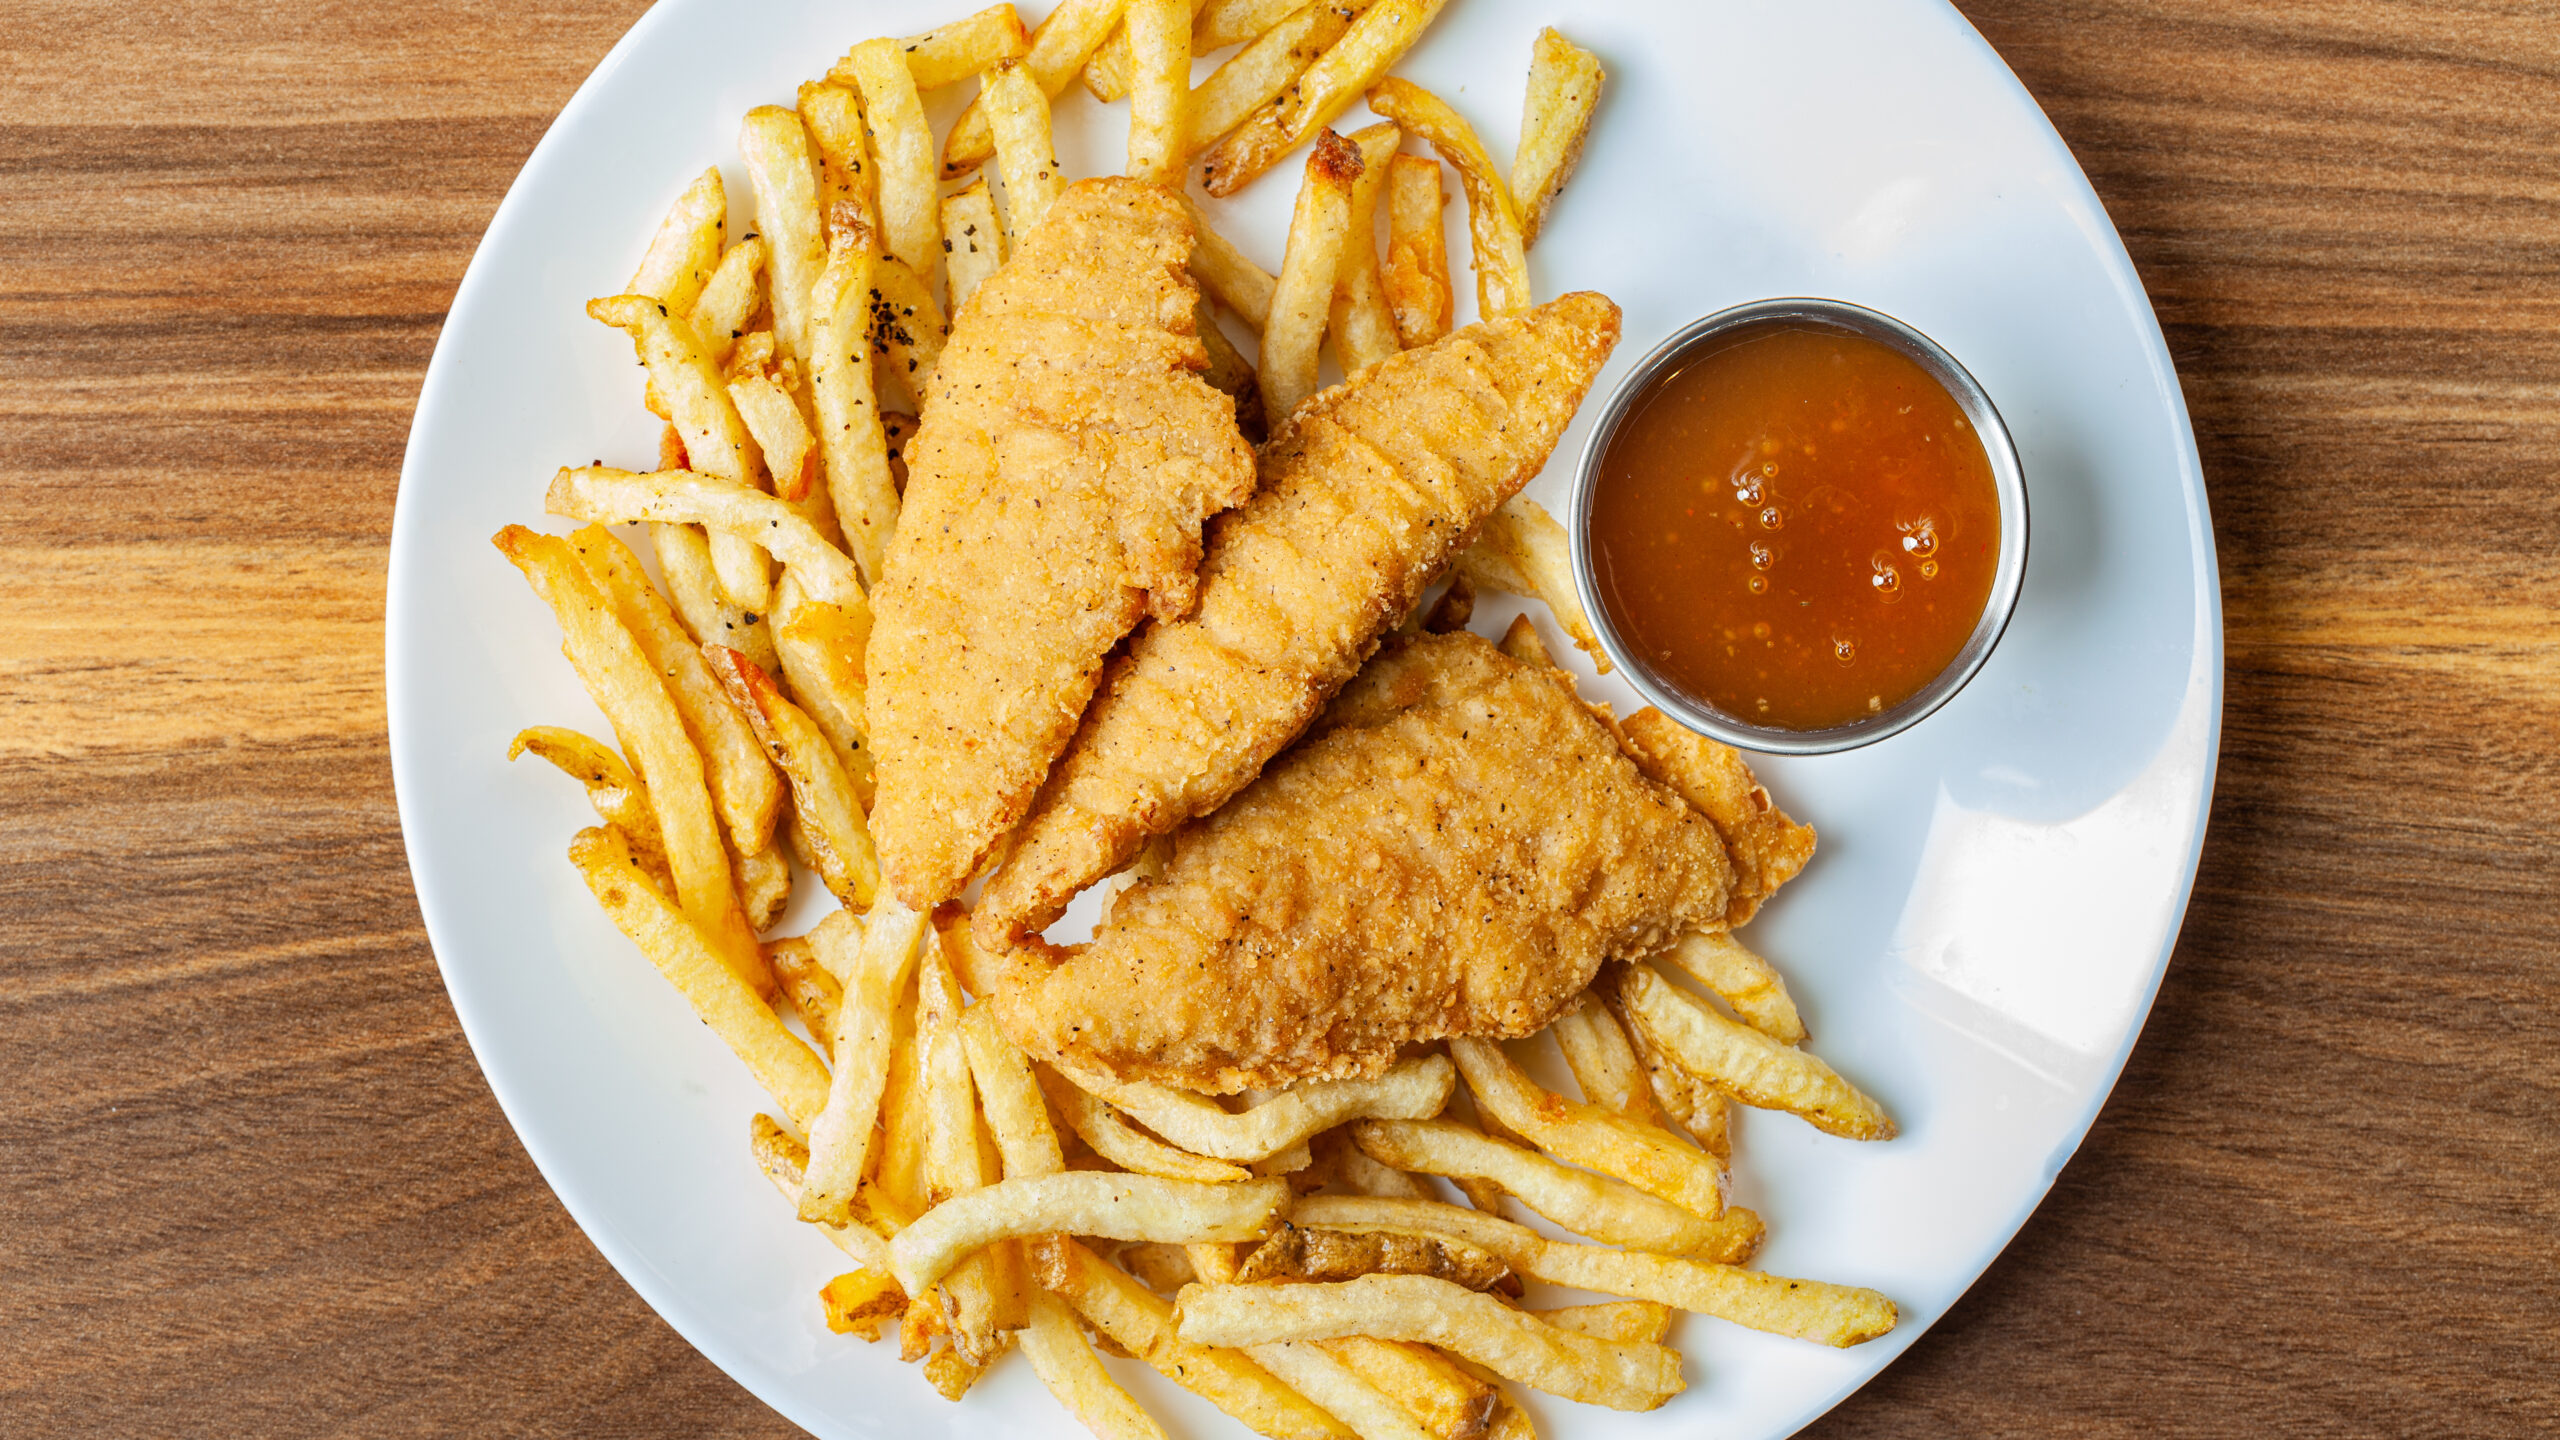 Kids' Chicken Tenders with Fries and Plum Sauce.